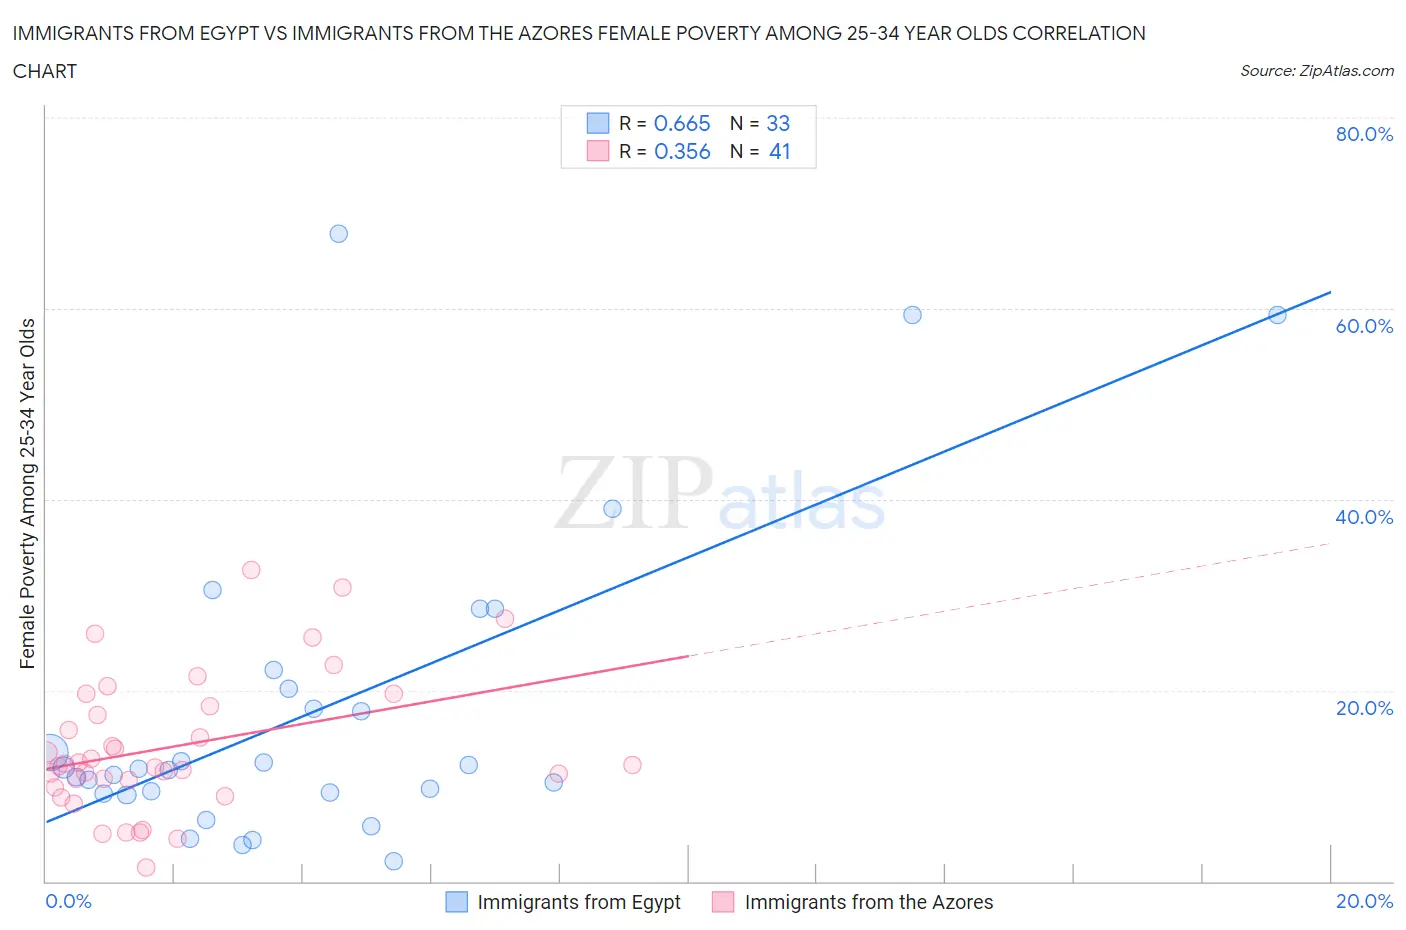 Immigrants from Egypt vs Immigrants from the Azores Female Poverty Among 25-34 Year Olds